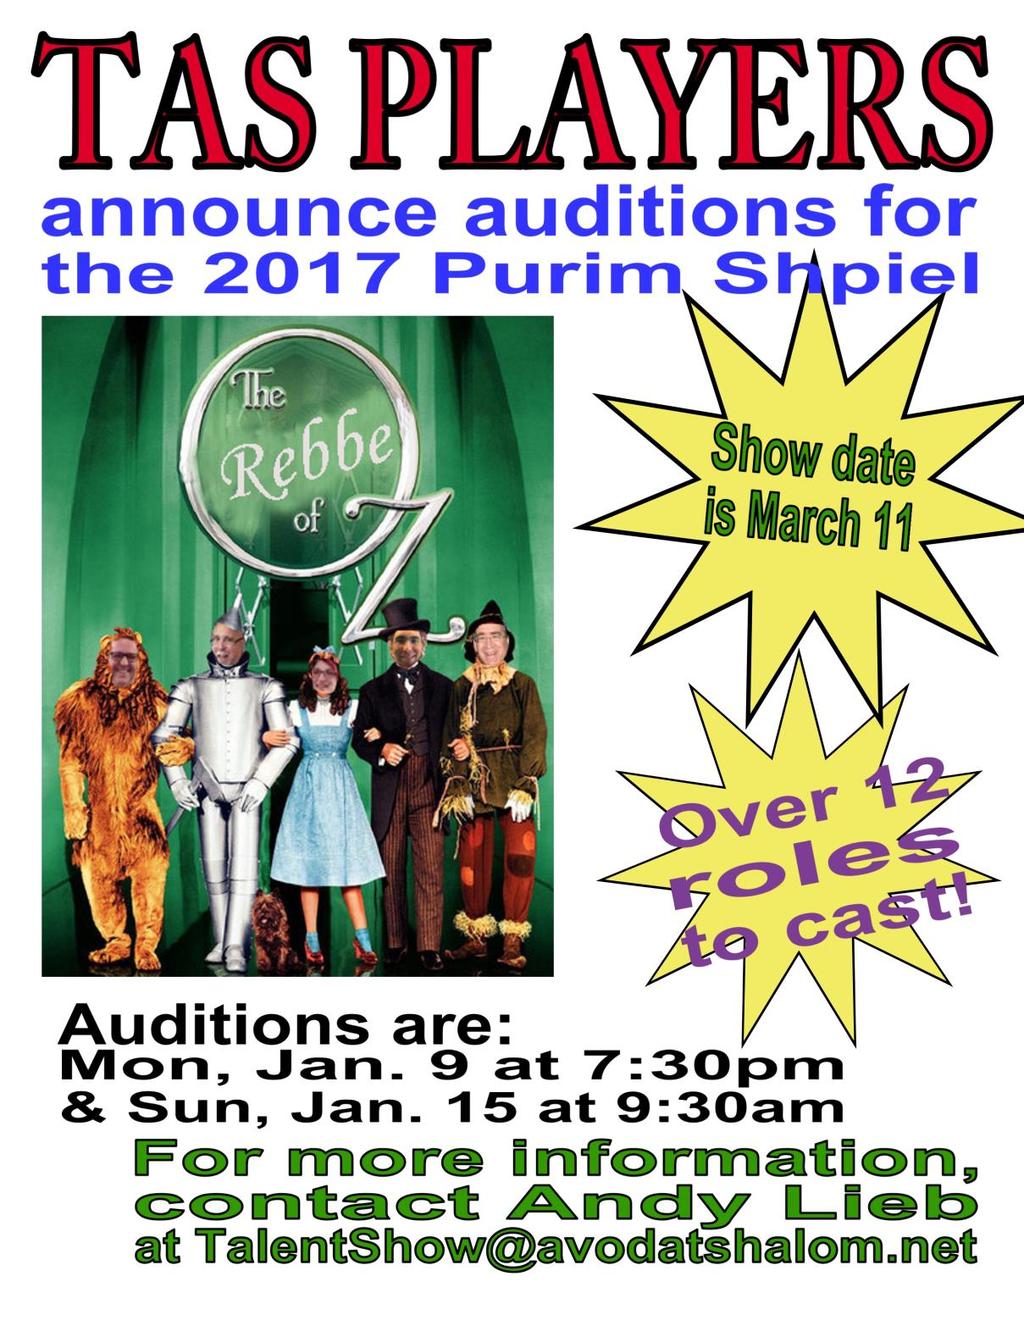 PURIM SHPIEL AUDITIONS Due to popular demand, the TAS Players will be presenting a Purim Shpiel for the Third Straight Year!